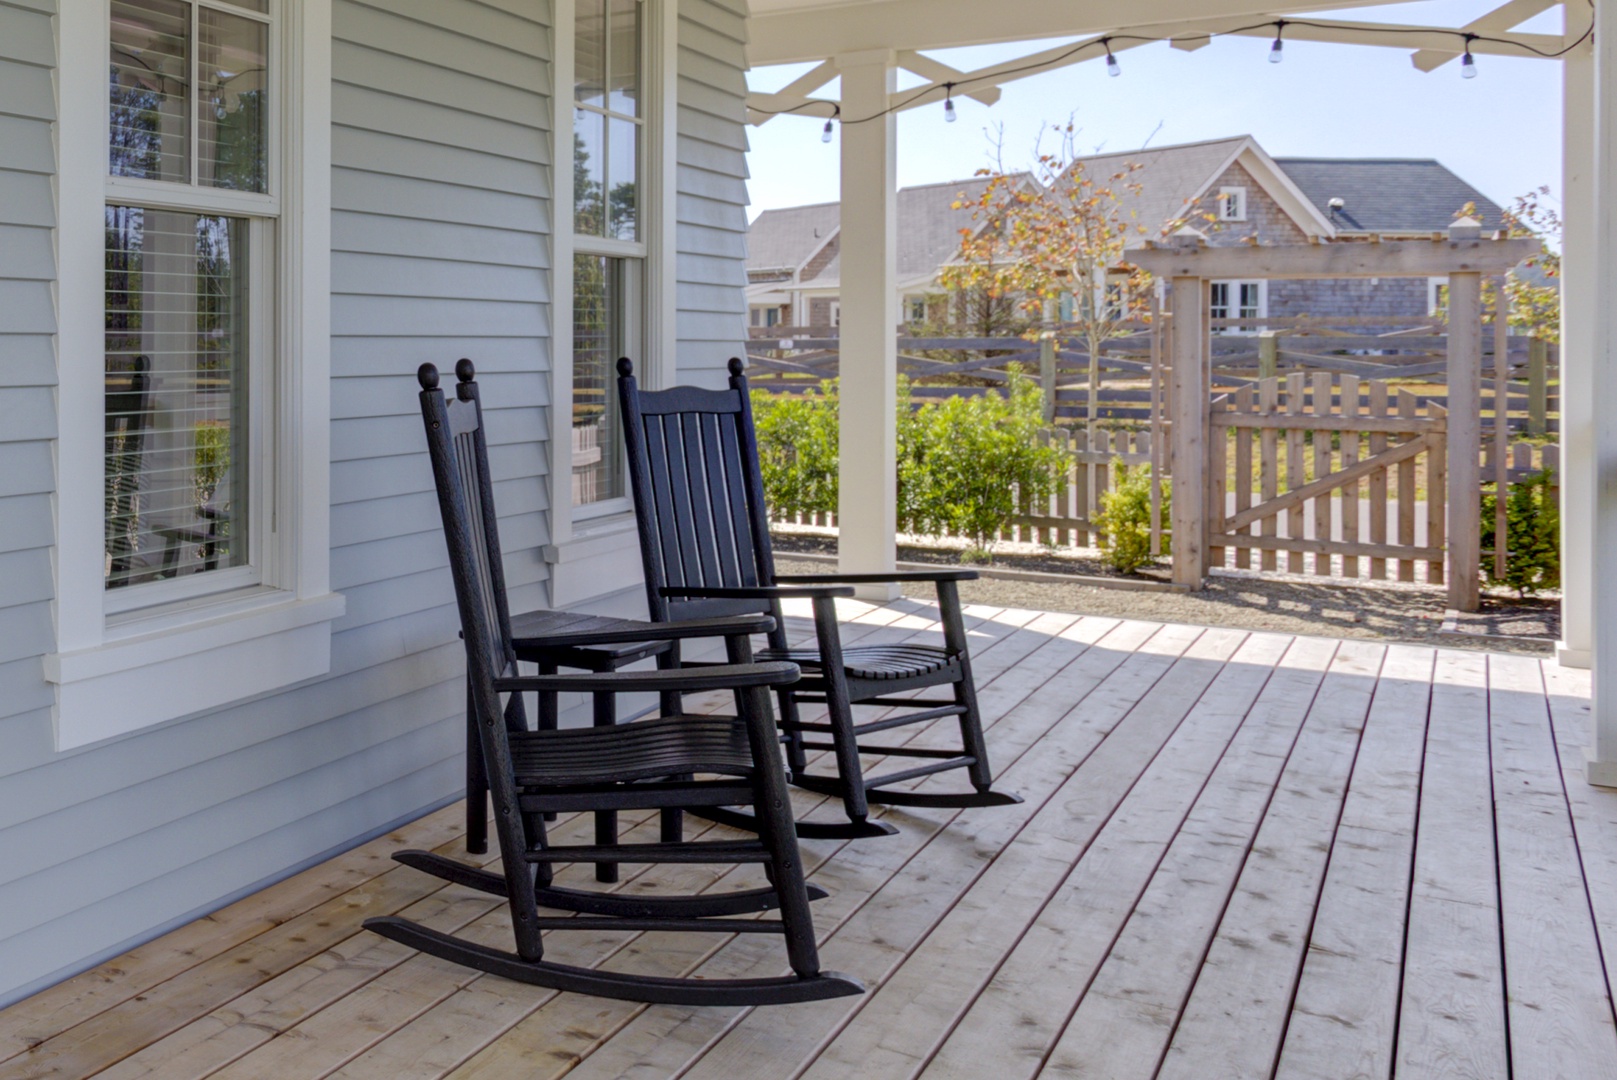 Outdoor seating on covered deck